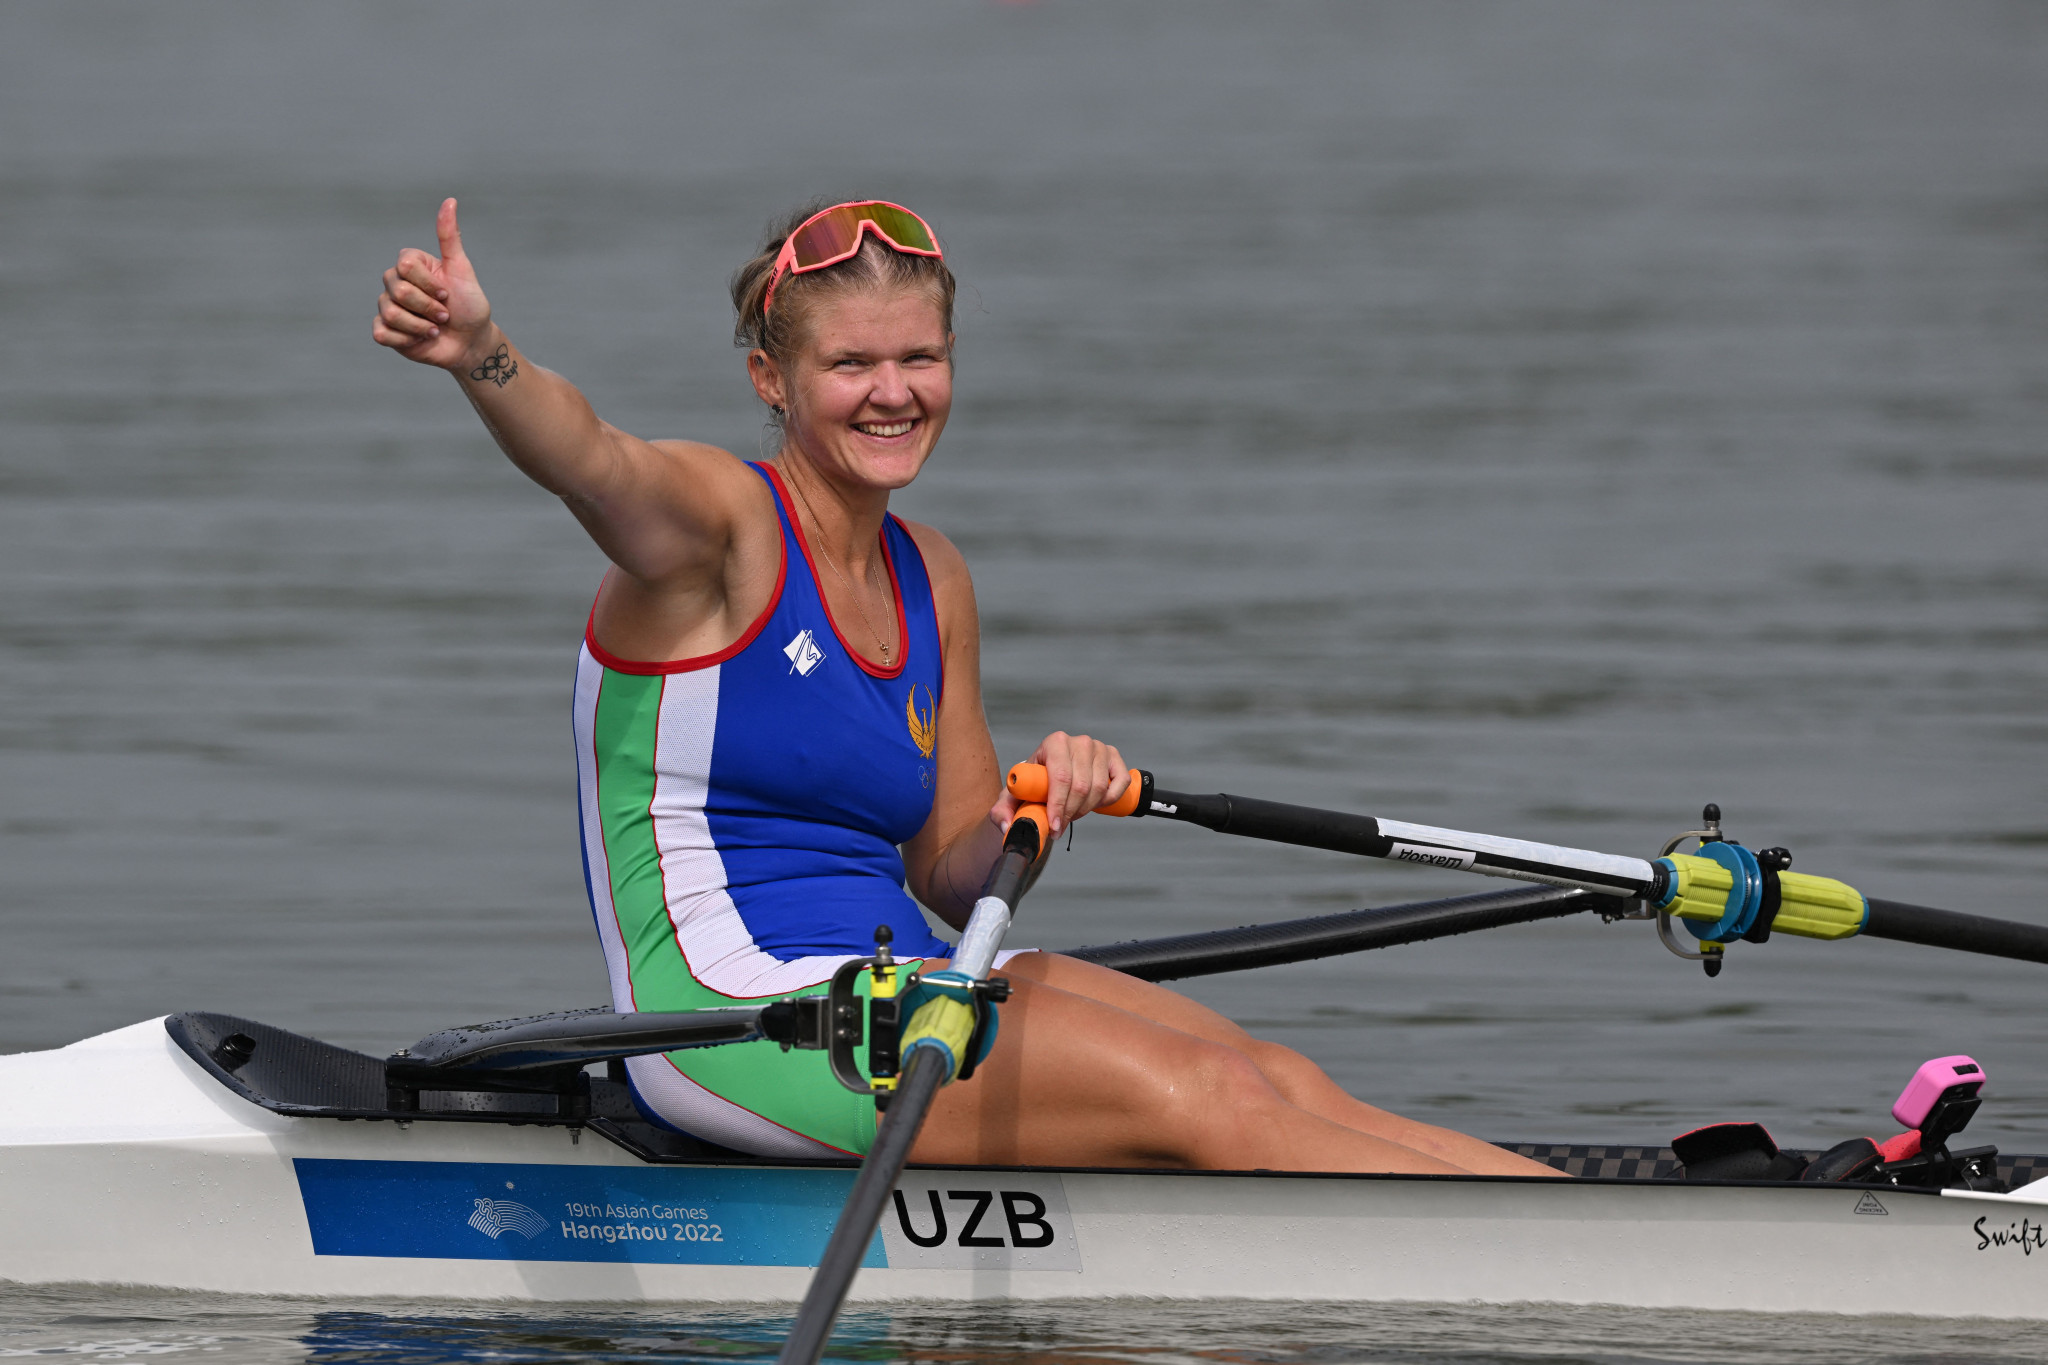 Anna Prakaten captured her first major title since switching her allegiances from Russia to Uzbekistan as she struck women's single sculls gold in Hangzhou ©Getty Images